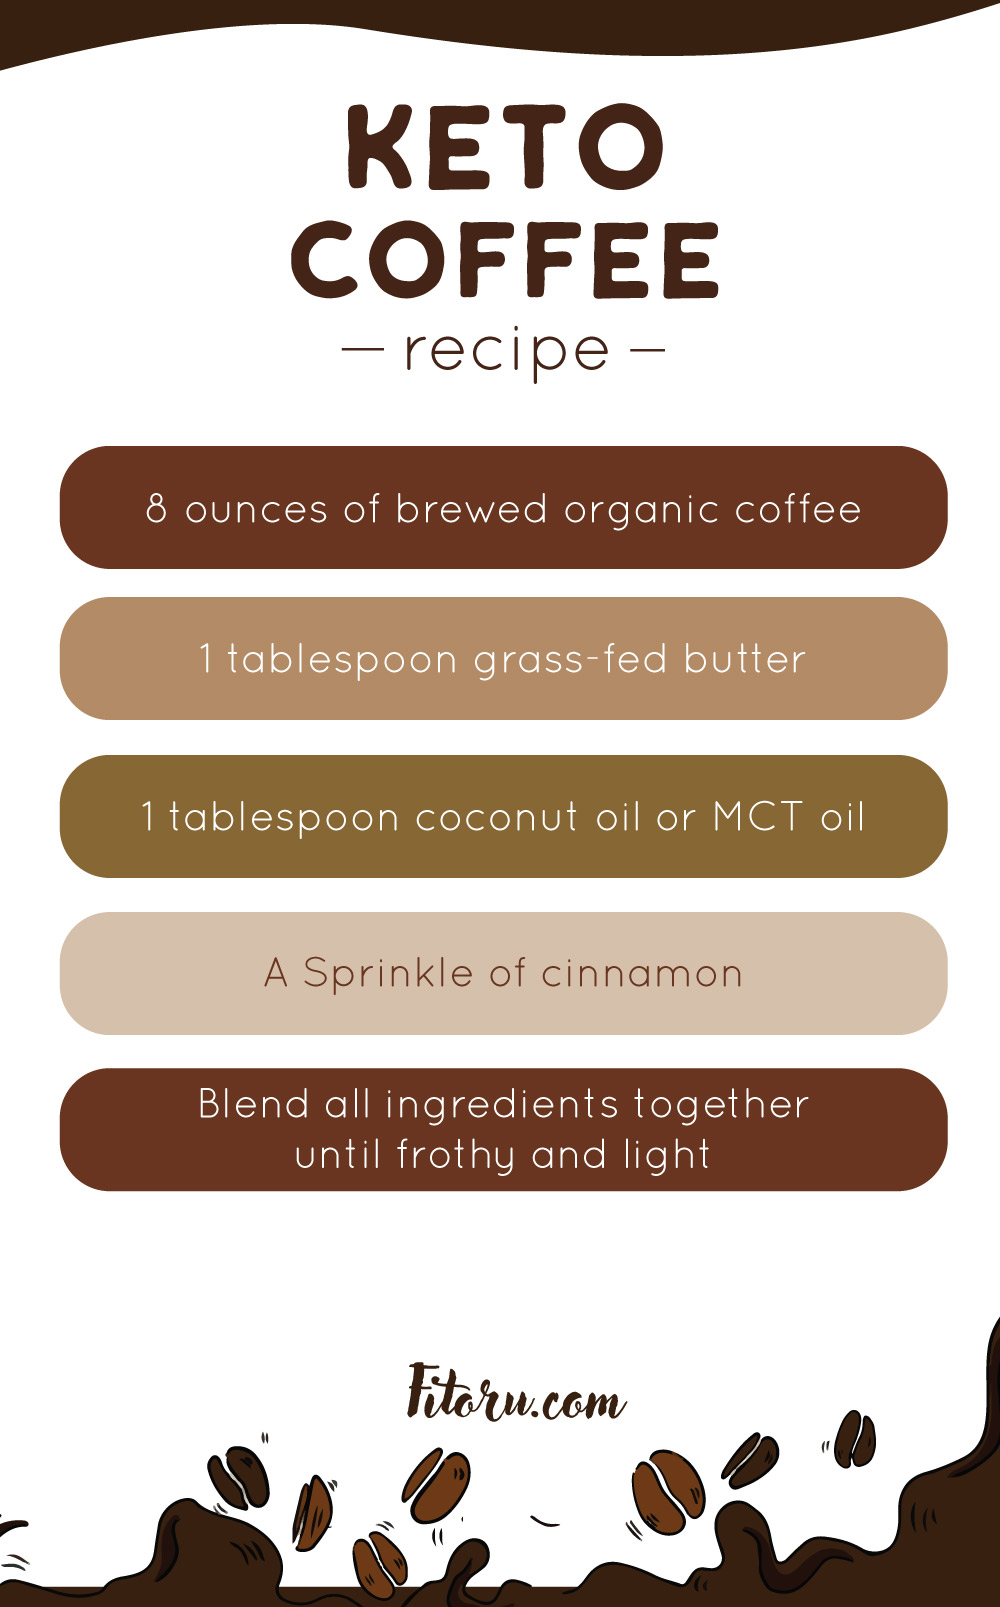 Here is the recipe on how to make keto coffee.